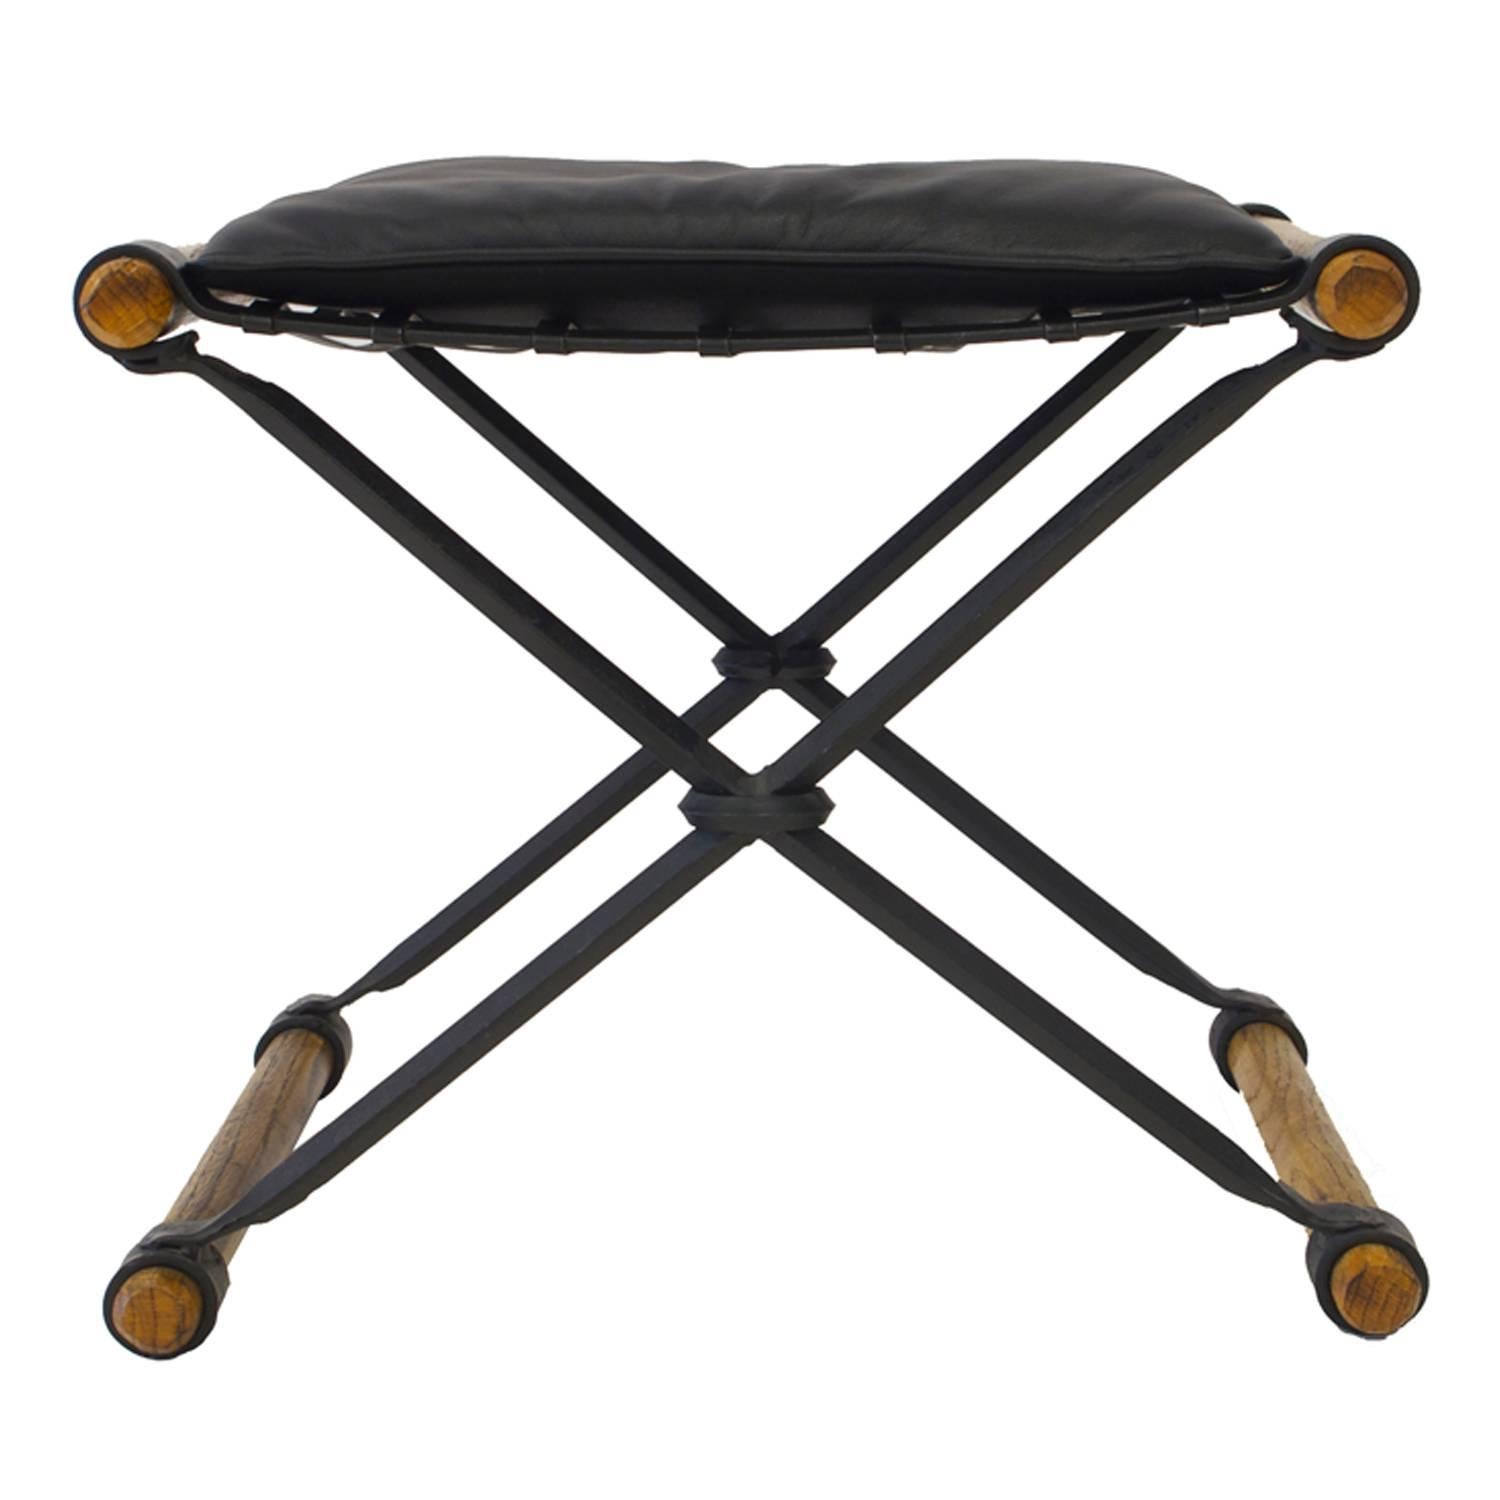 Cleo Baldon X-Benches Leather Oak Wrought Iron Pair, USA, 1960s.  New leather cushions. Black wrought iron frame with oak dowels. Baldon was one of the leading architects and designers who led the California Design movement in the 1960s. She